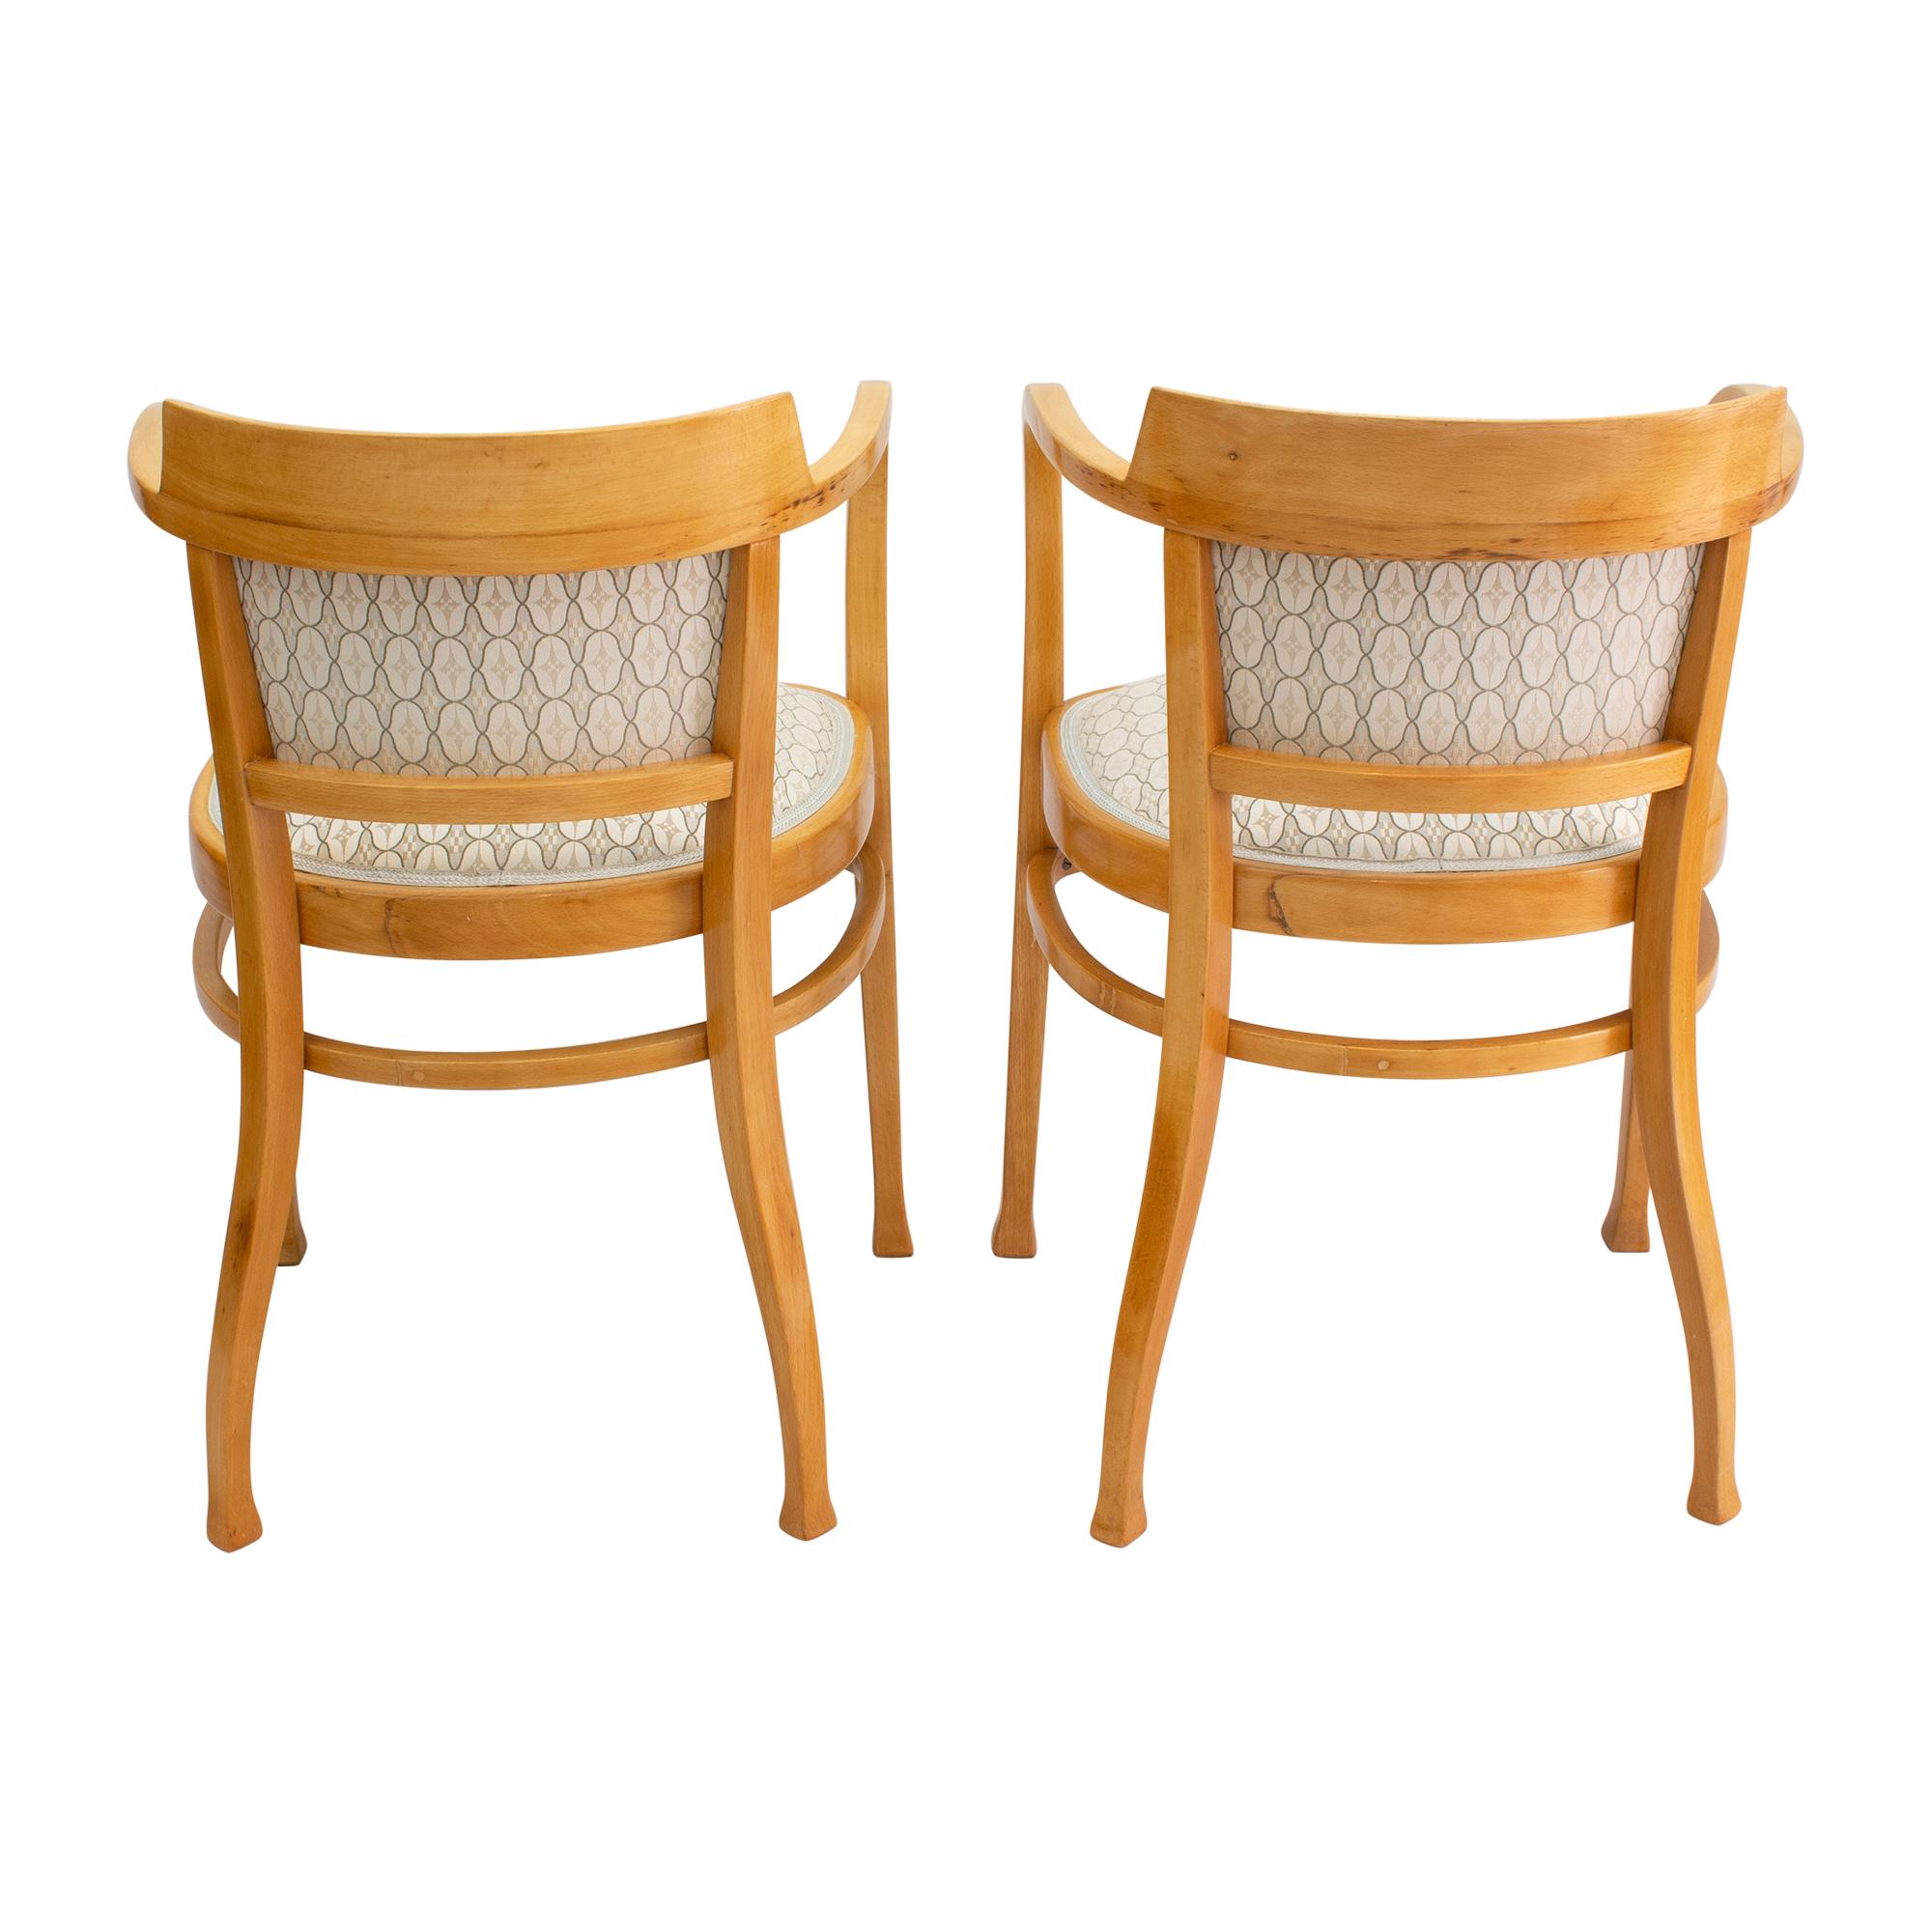 Beautiful pair of Thonet armchairs from the Art Nouveau period in solid beech wood. The chairs are reupholstered and covered with new fabric. In very good restored condition.